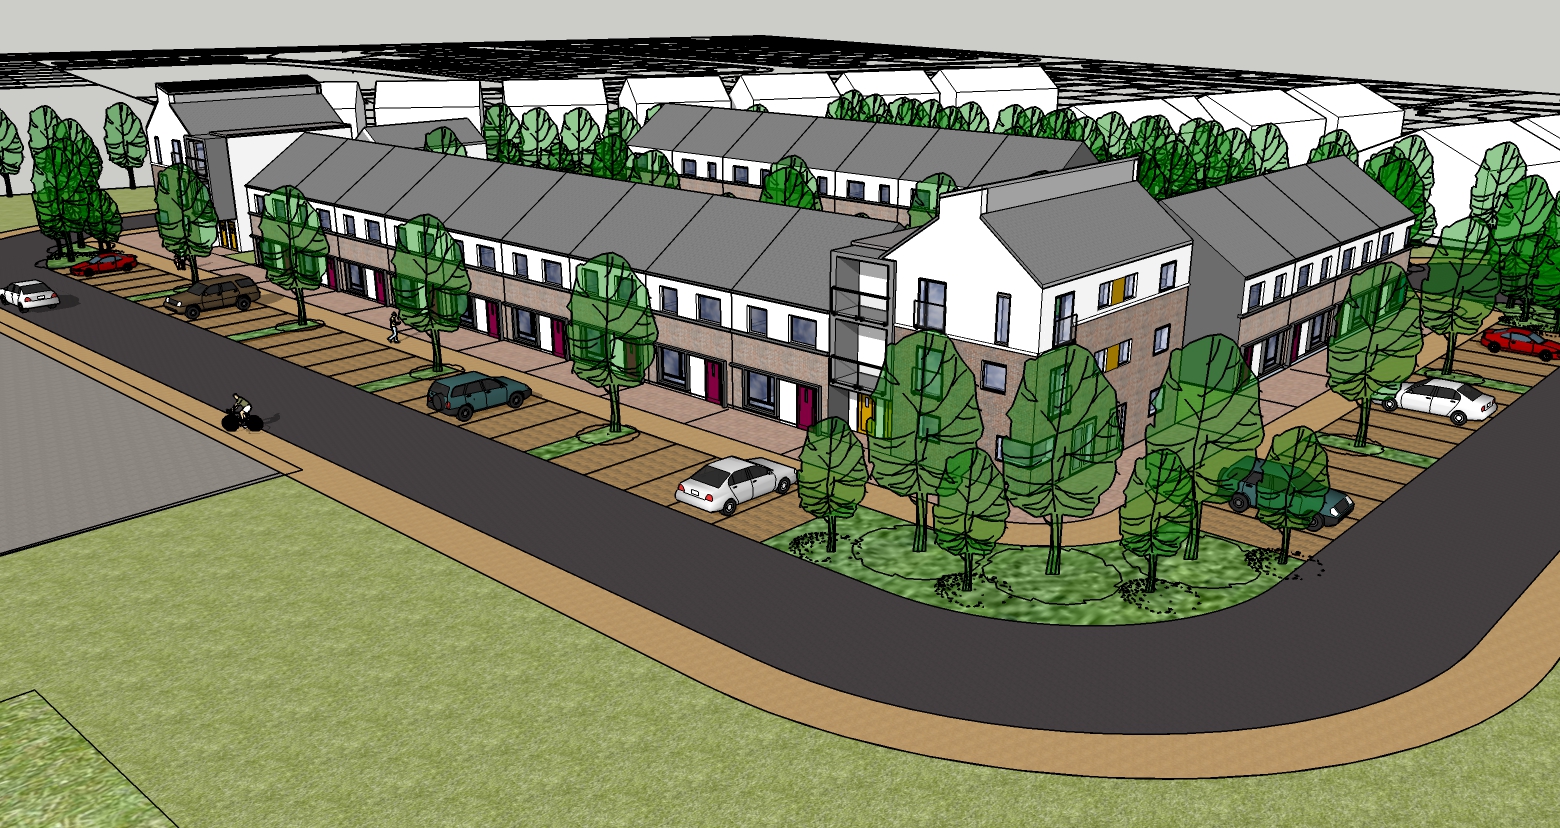 Proposed Social Housing Development comprising of 27 units 